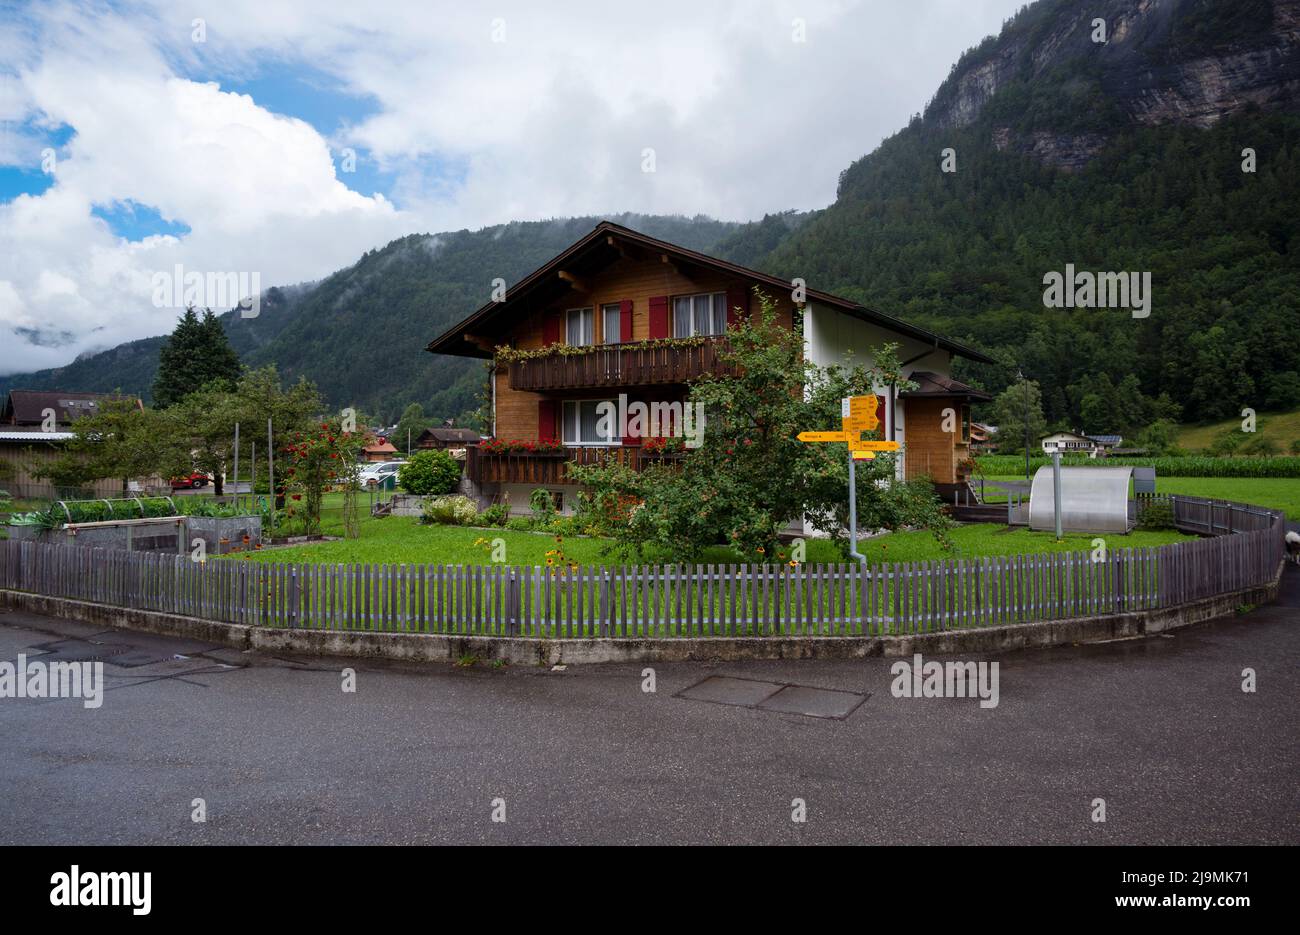 View of a beautiful alpine wooden chalet house with a beautiful and colorful garden and fence captured at Aareschlucht, Switzerland. Stock Photo